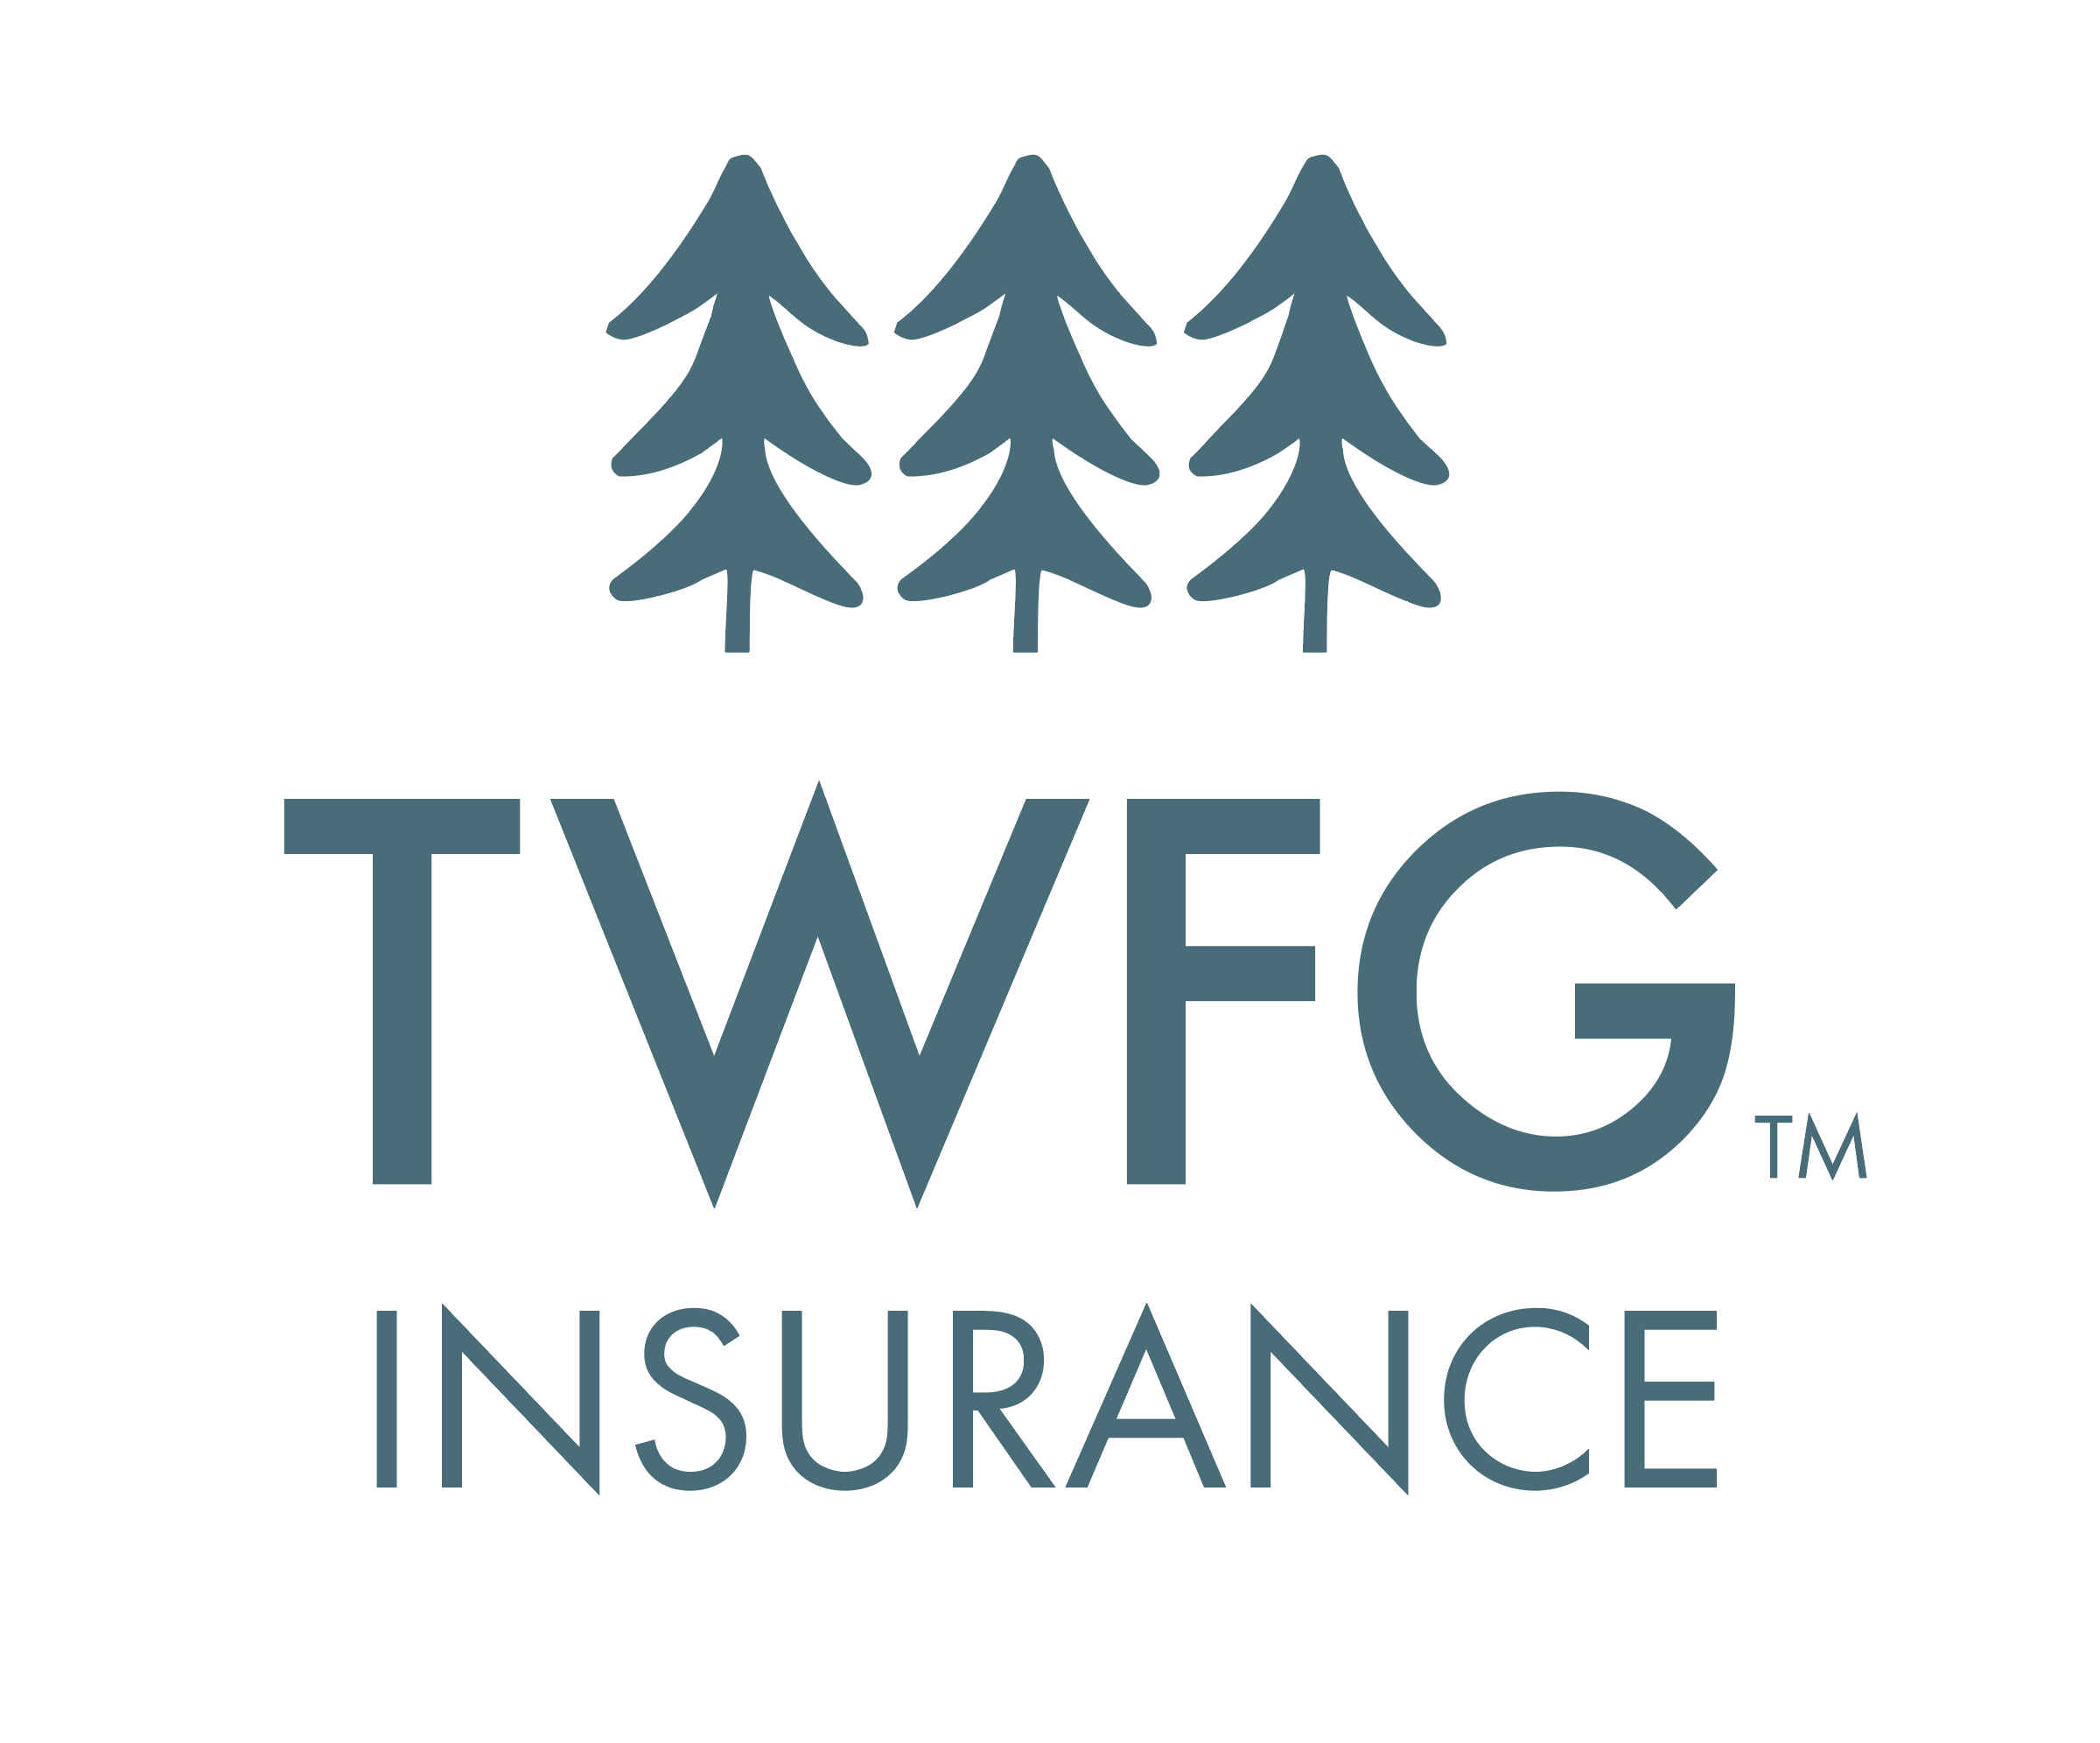 TWFG Insurance logo in all caps with blue text